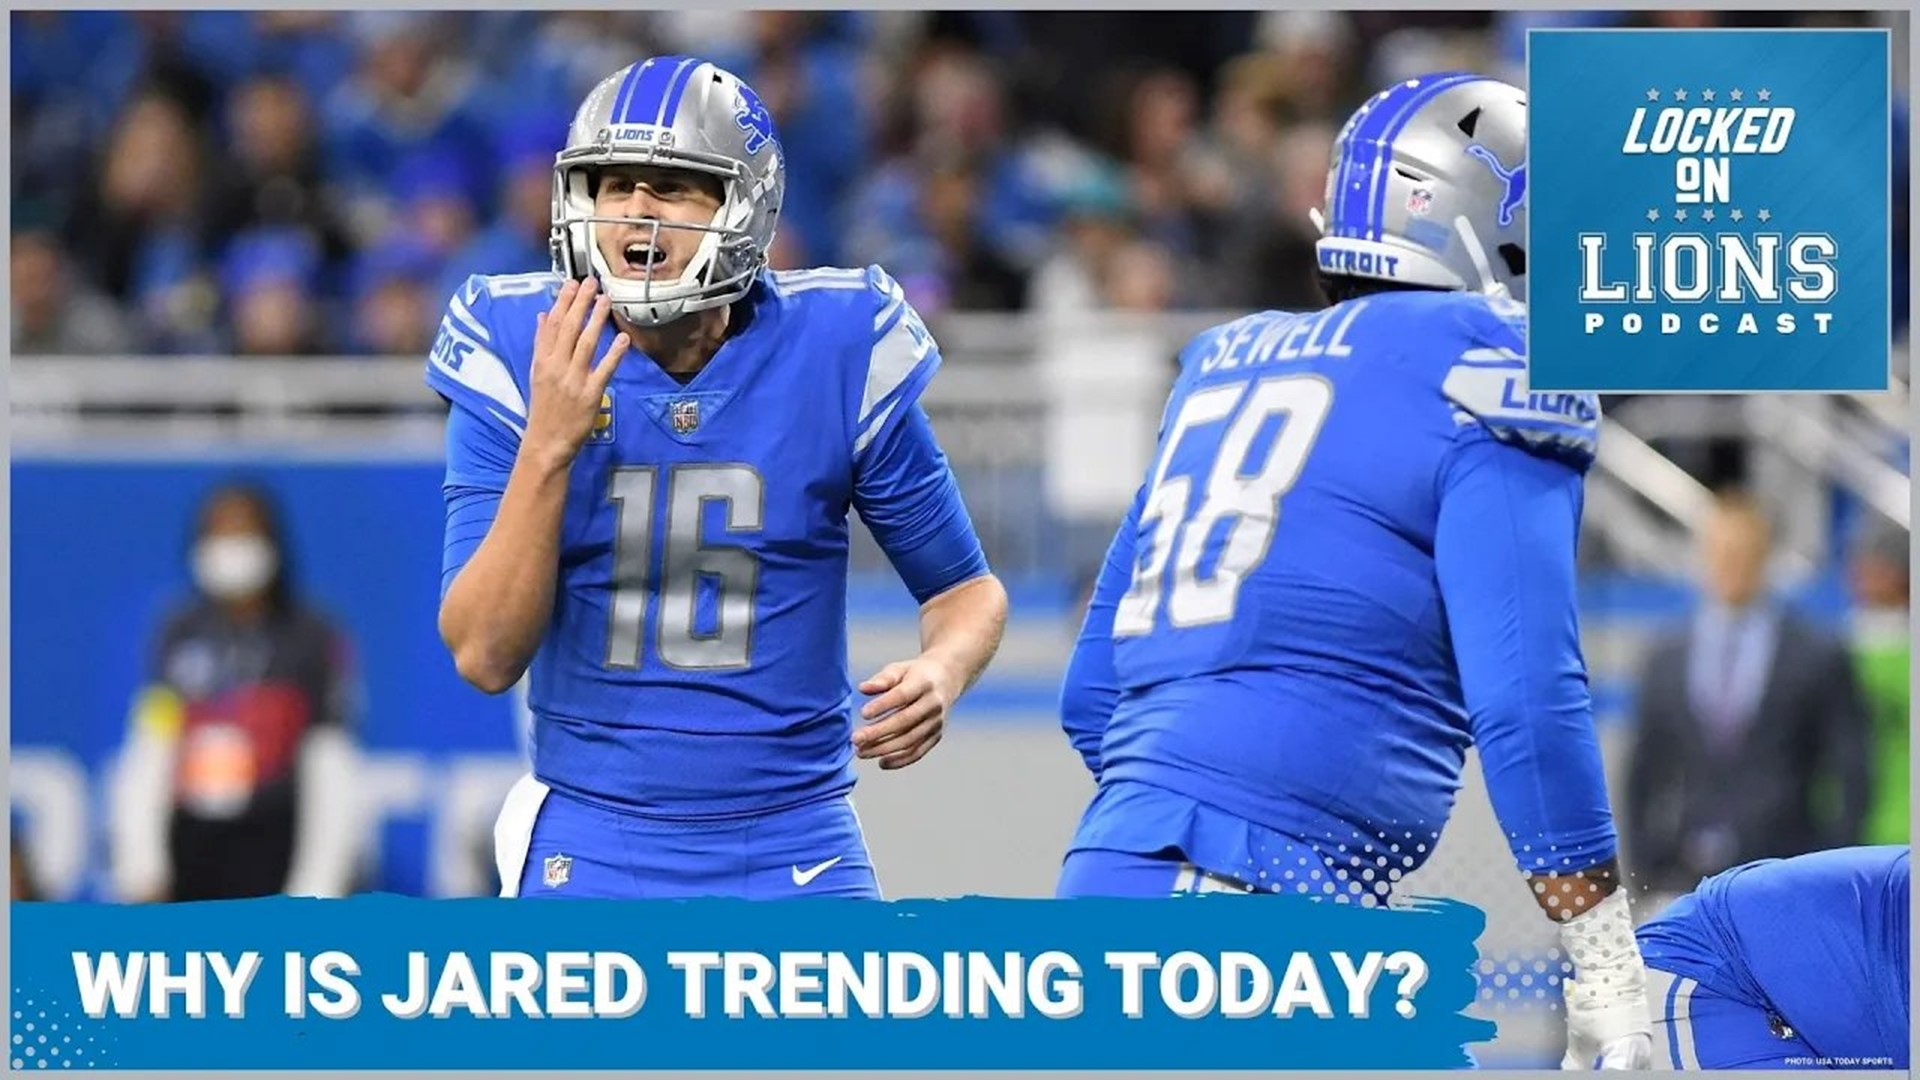 Jared Goff trending on Twitter today.. why? #Lions staying the course. Staff is complete and more.